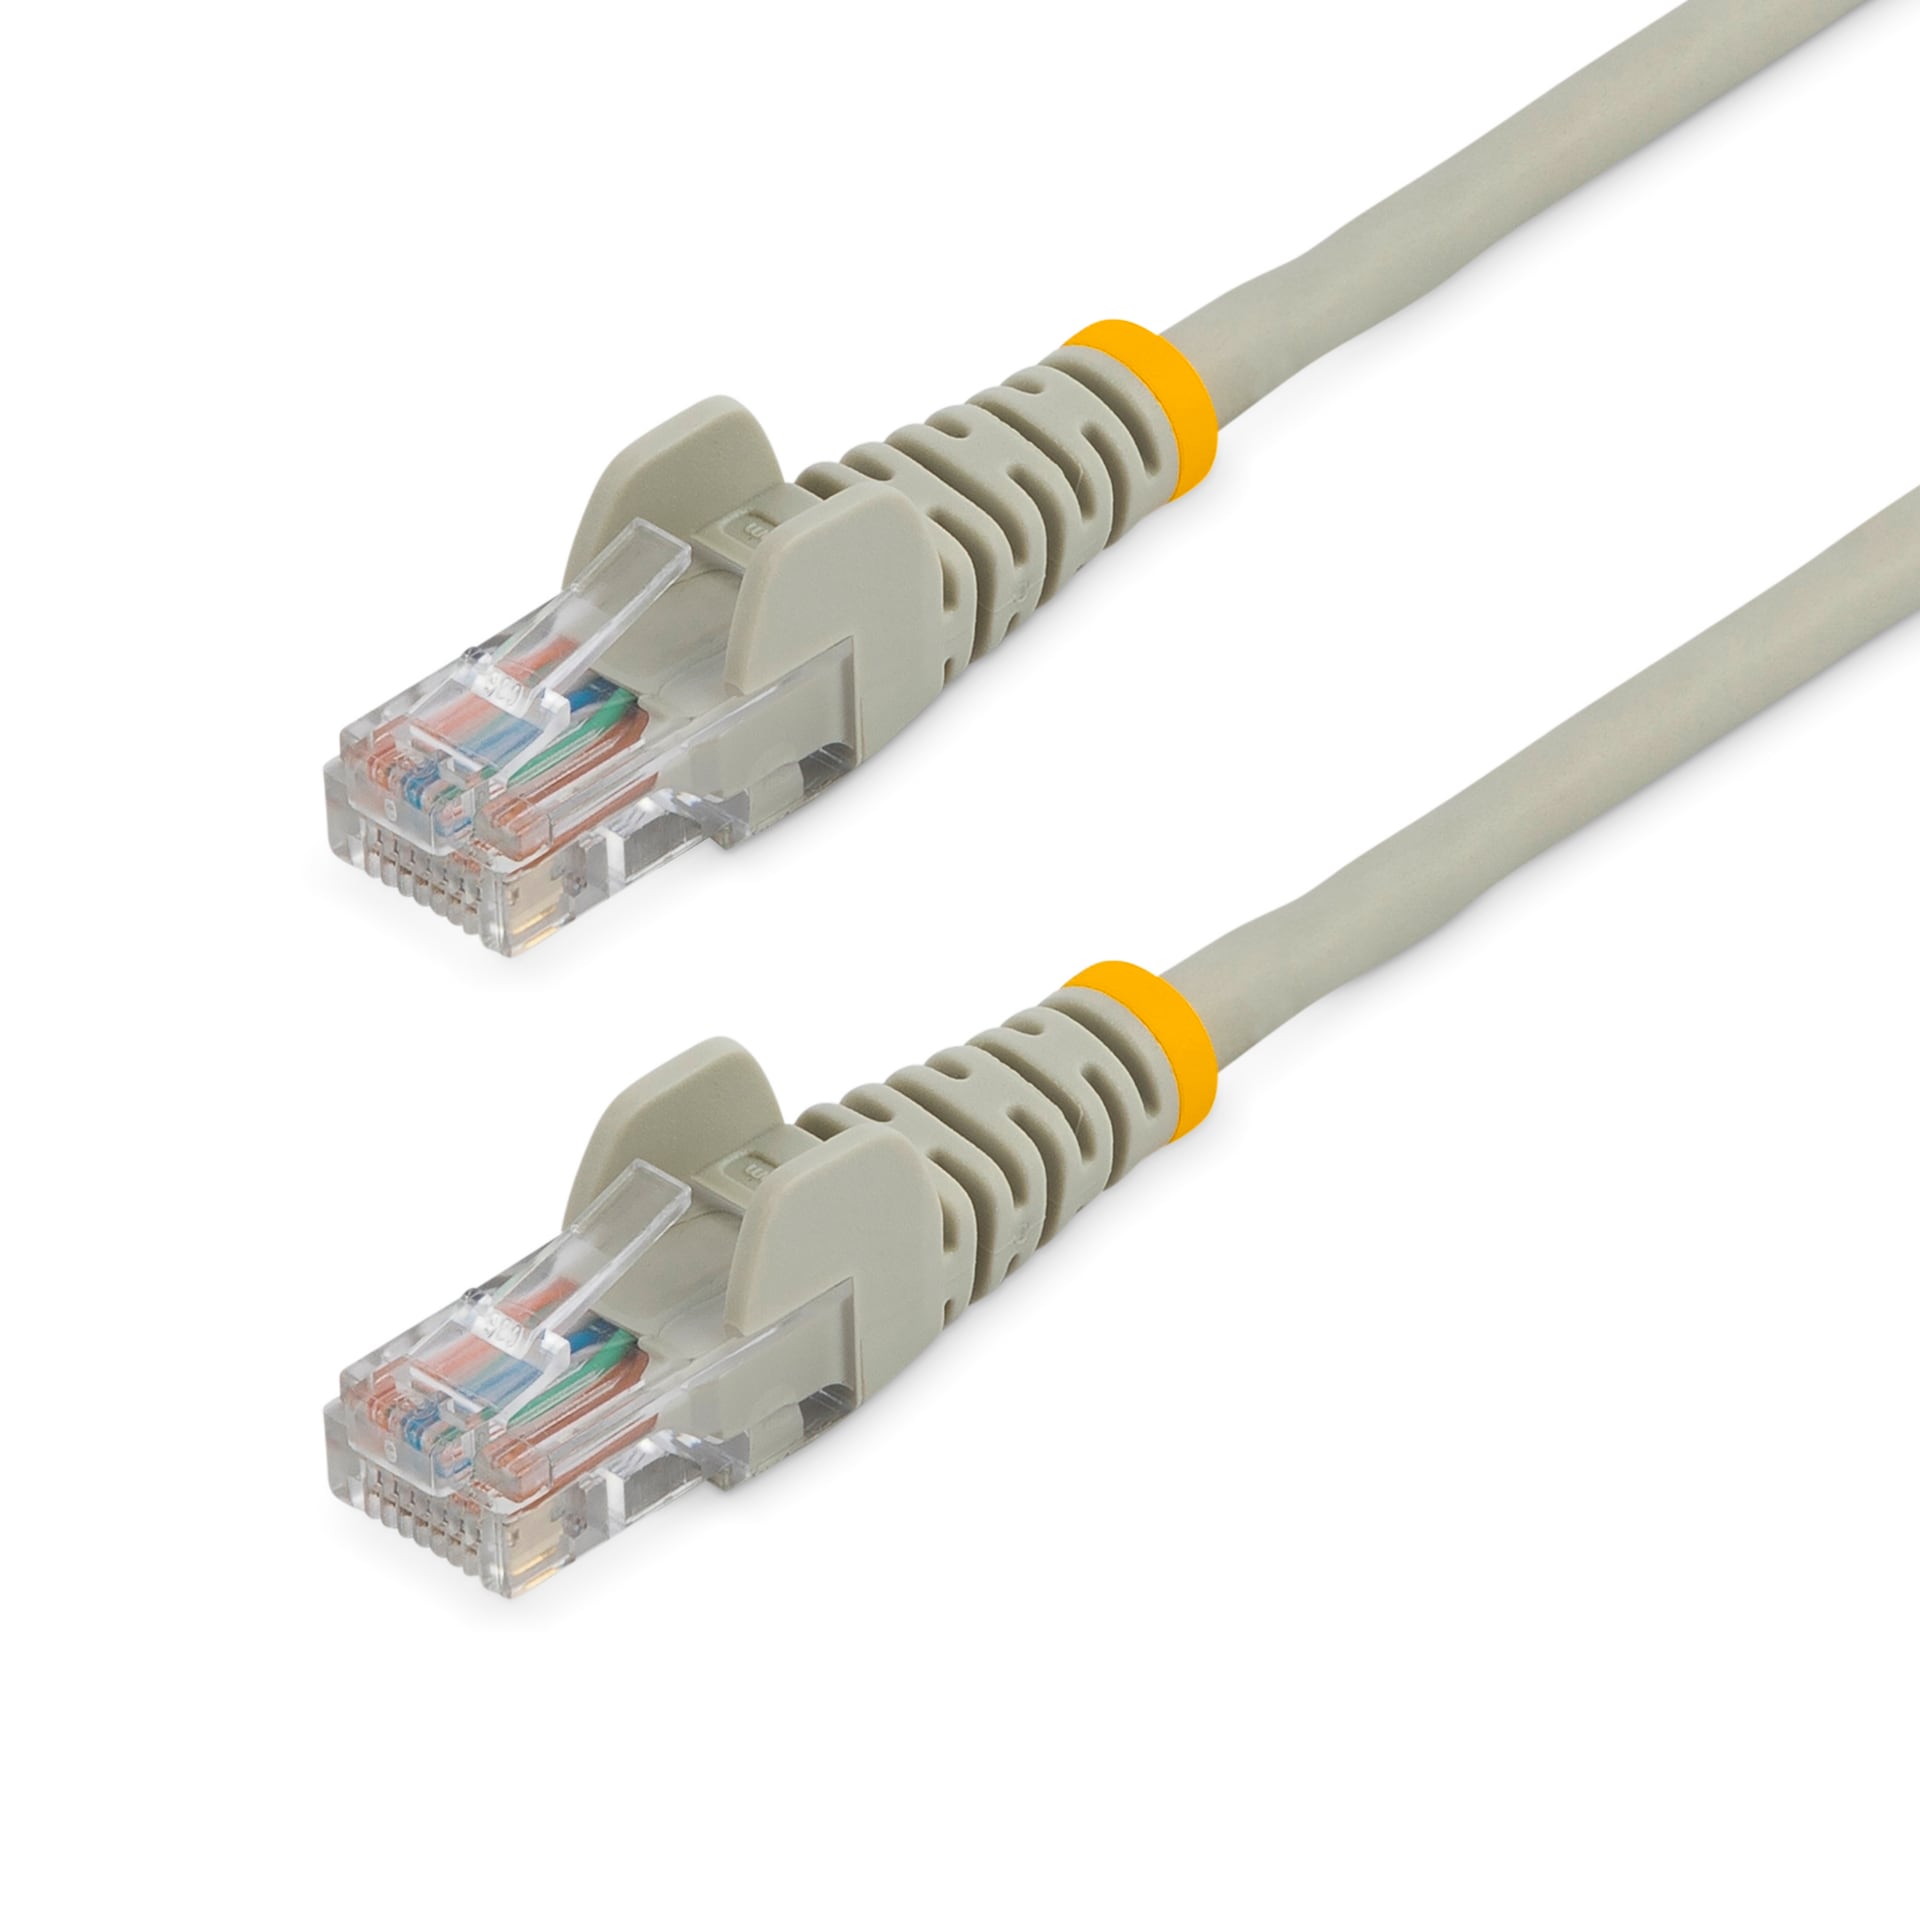 StarTech.com Cat5e Ethernet Cable 50 ft Gray - Cat 5e Snagless Patch Cable